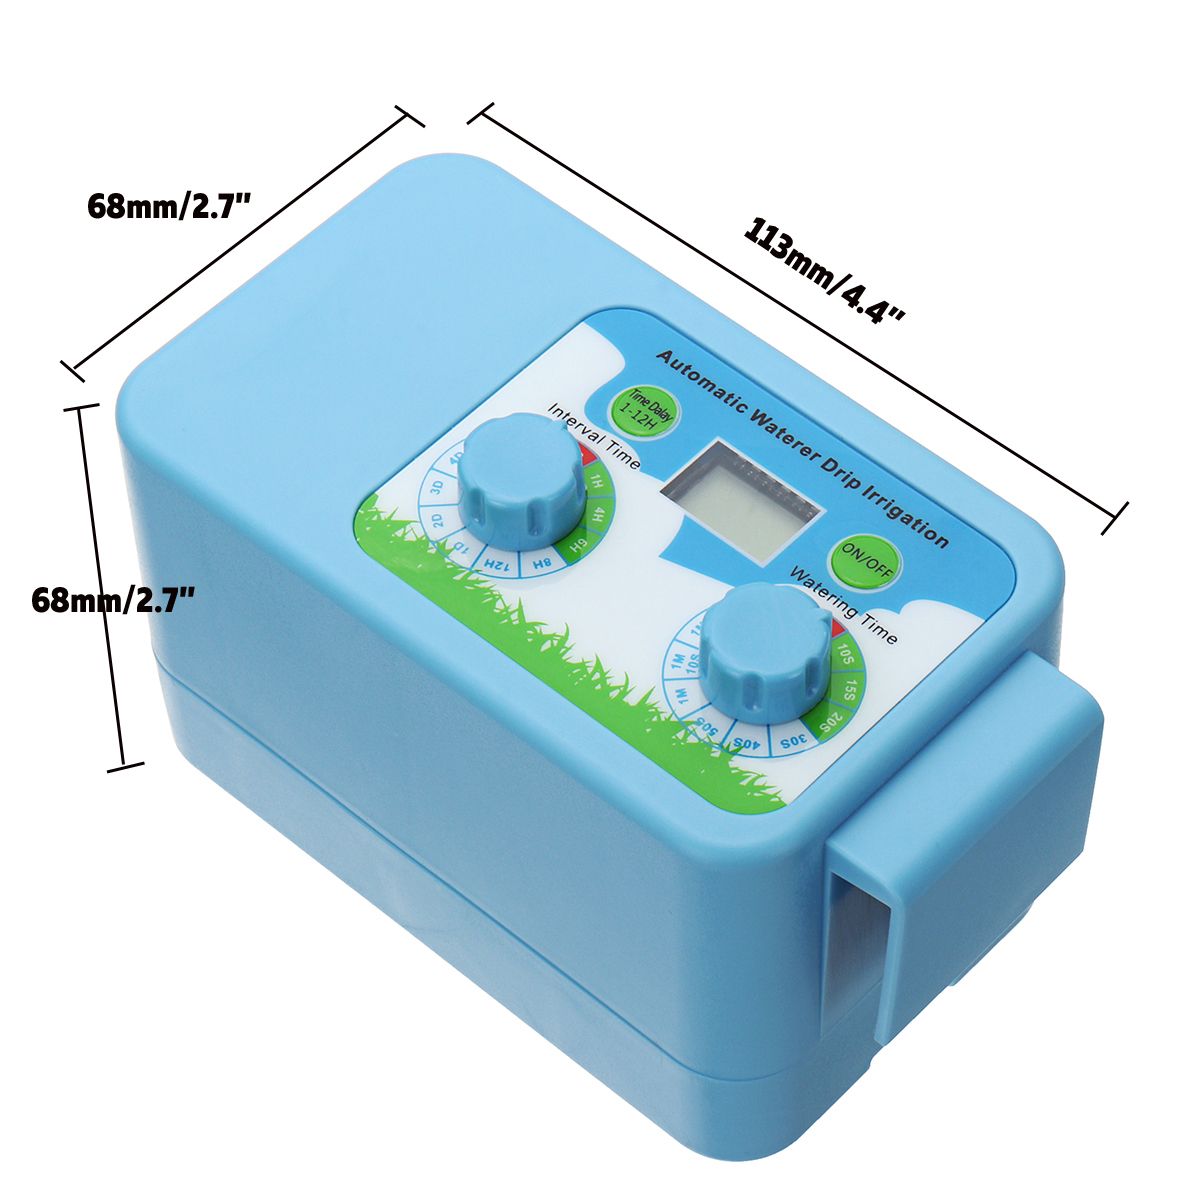 Automatic-Drip-Irrigation-Watering-Timer-System-Interval-Garden-LCD-Controller-1353892